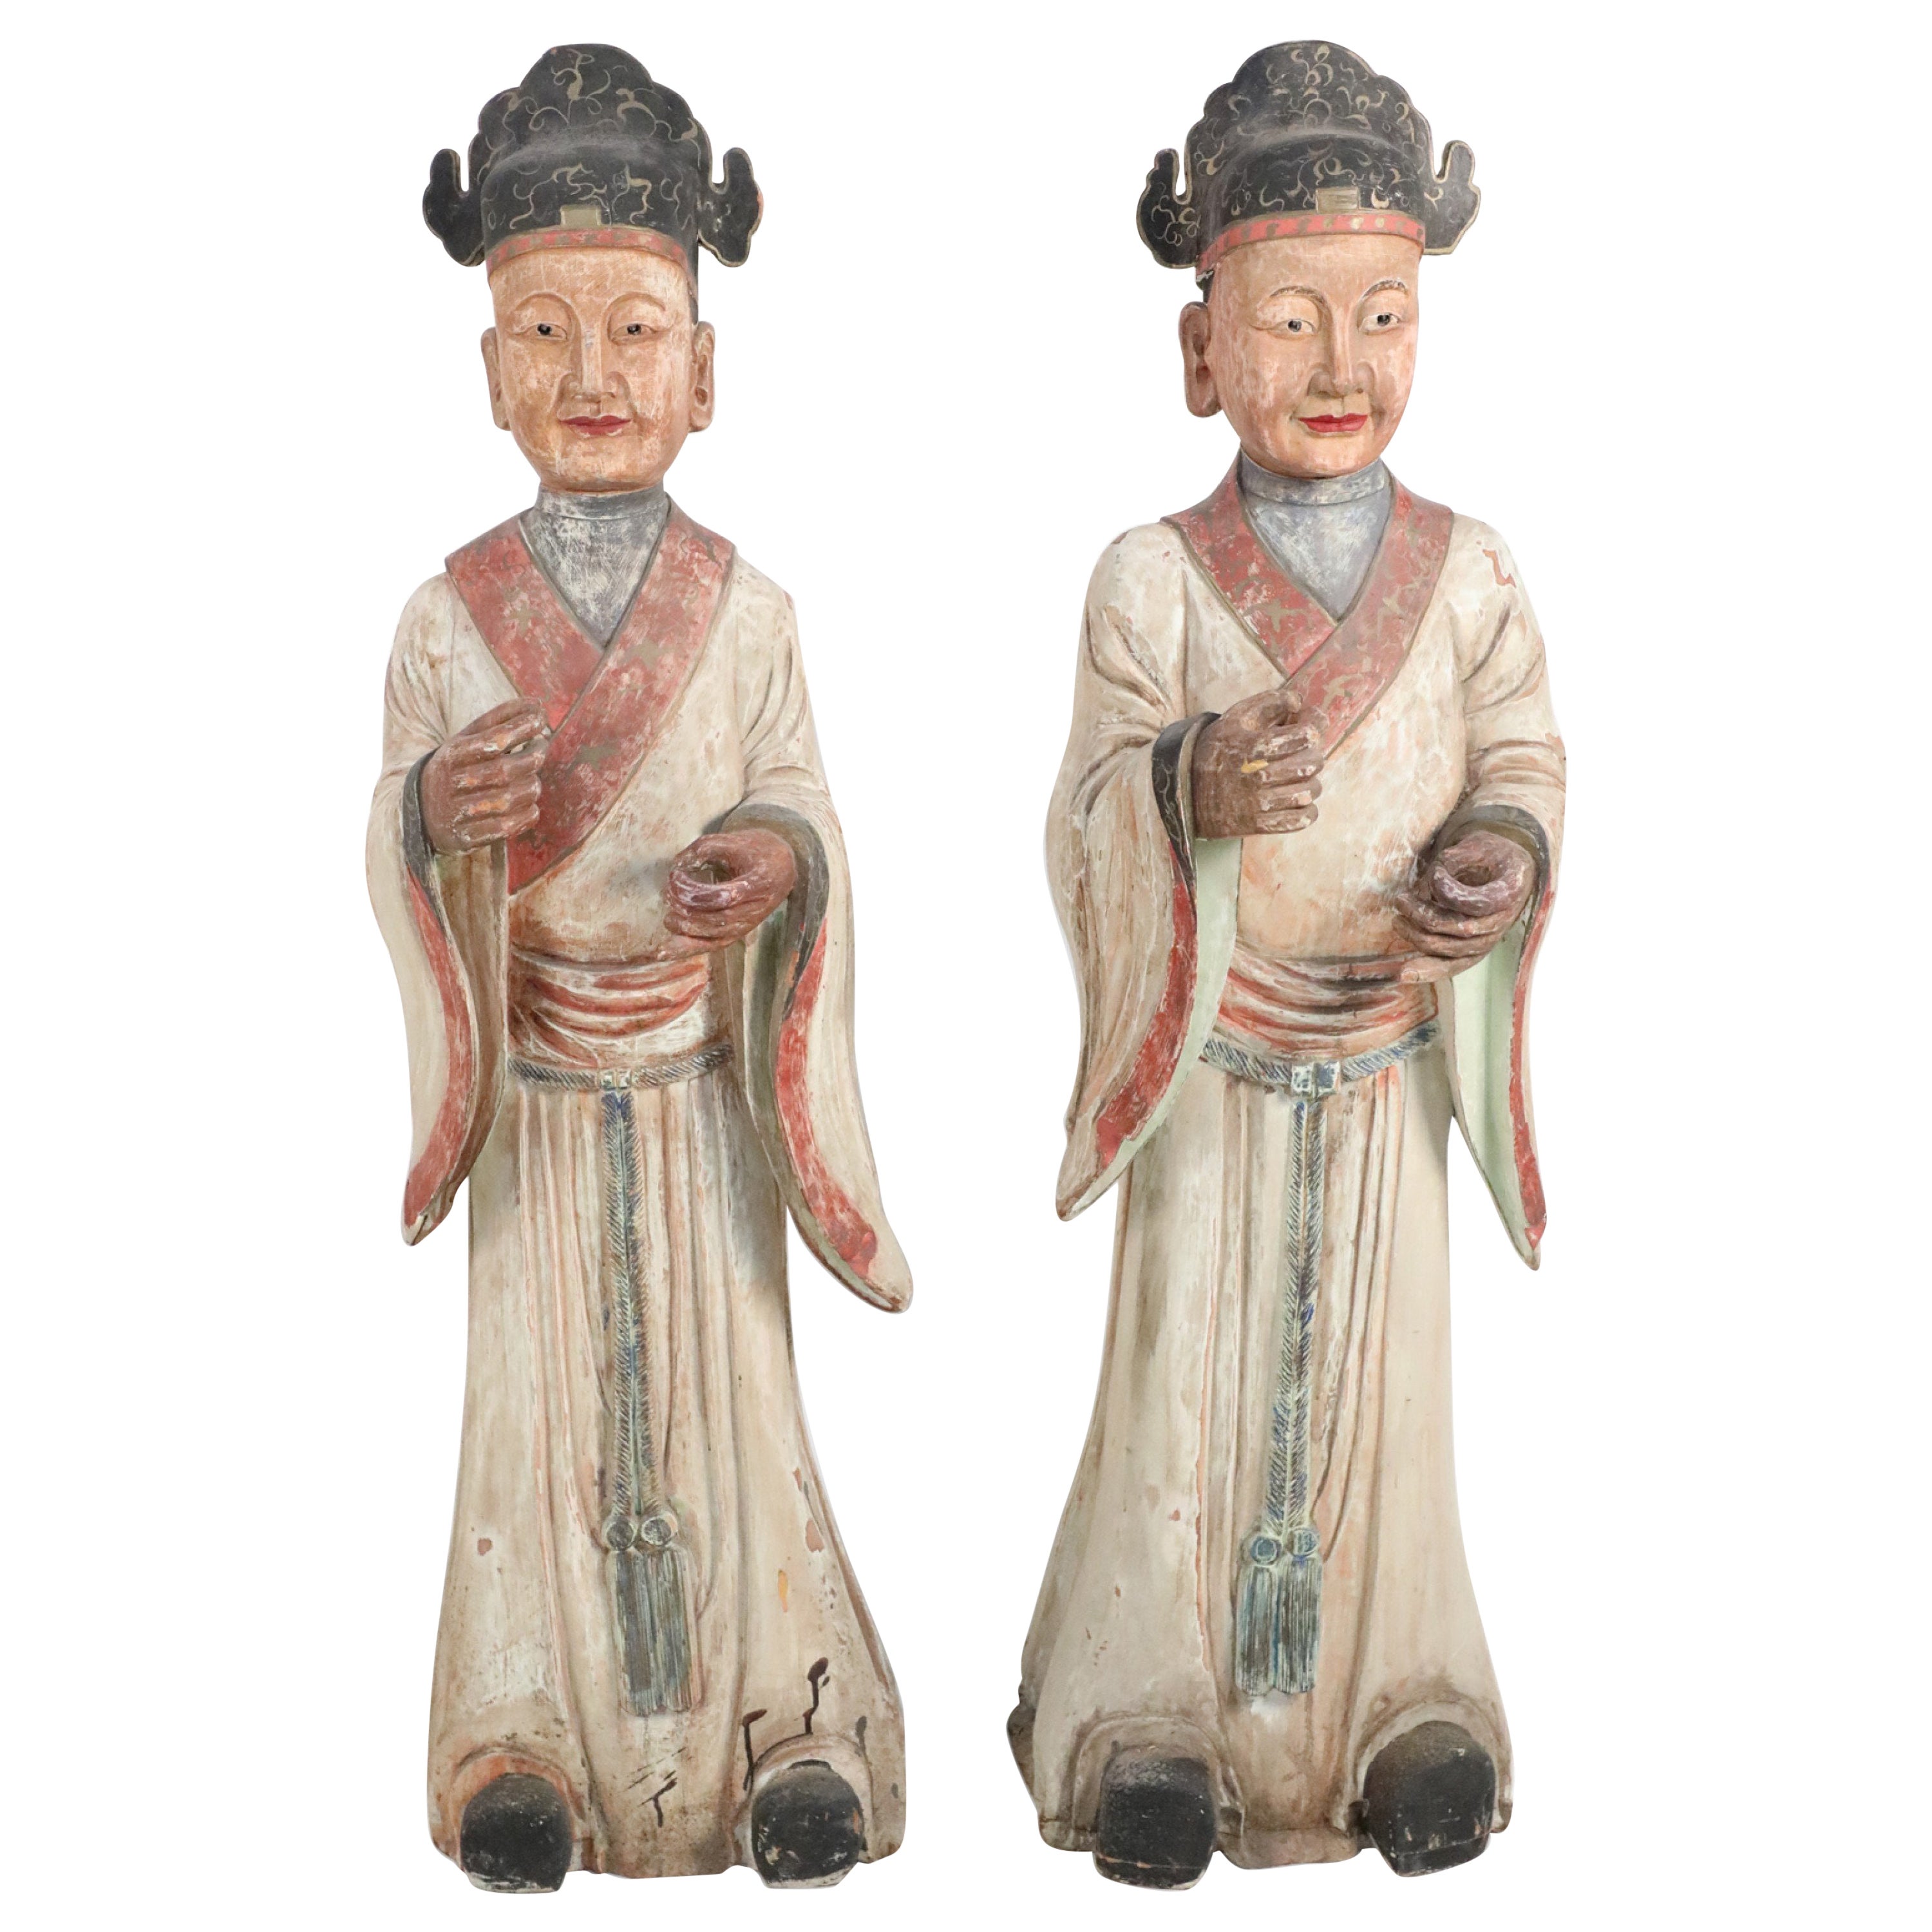 Pair of Chinese Wooden Civil Officer Statues